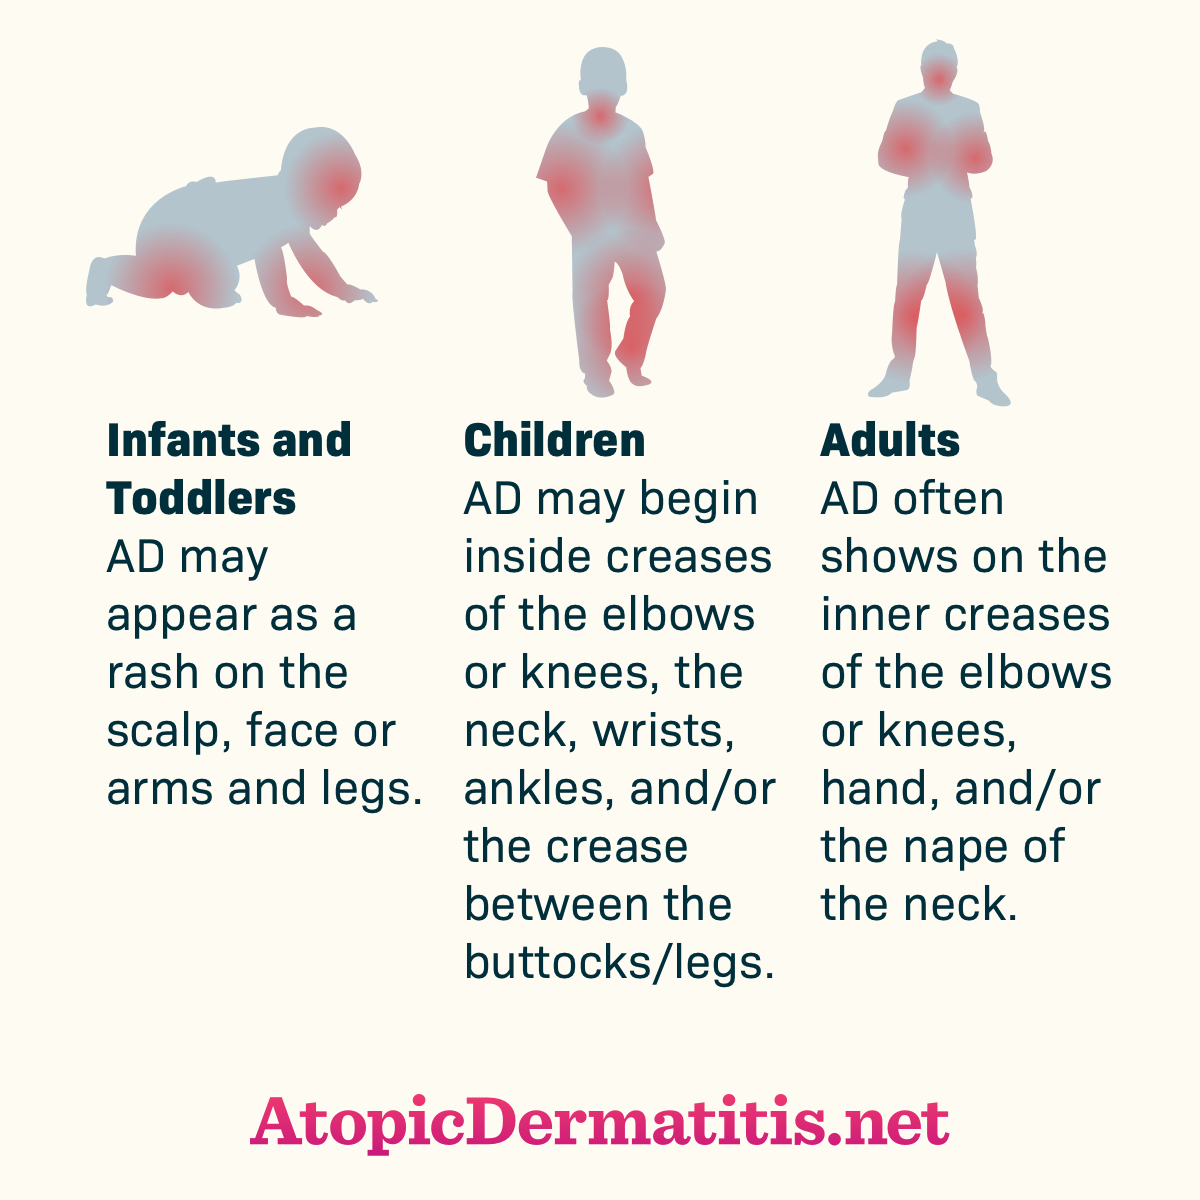 Atopic dermatitis rash locations differ between infants and toddlers, children, and adults